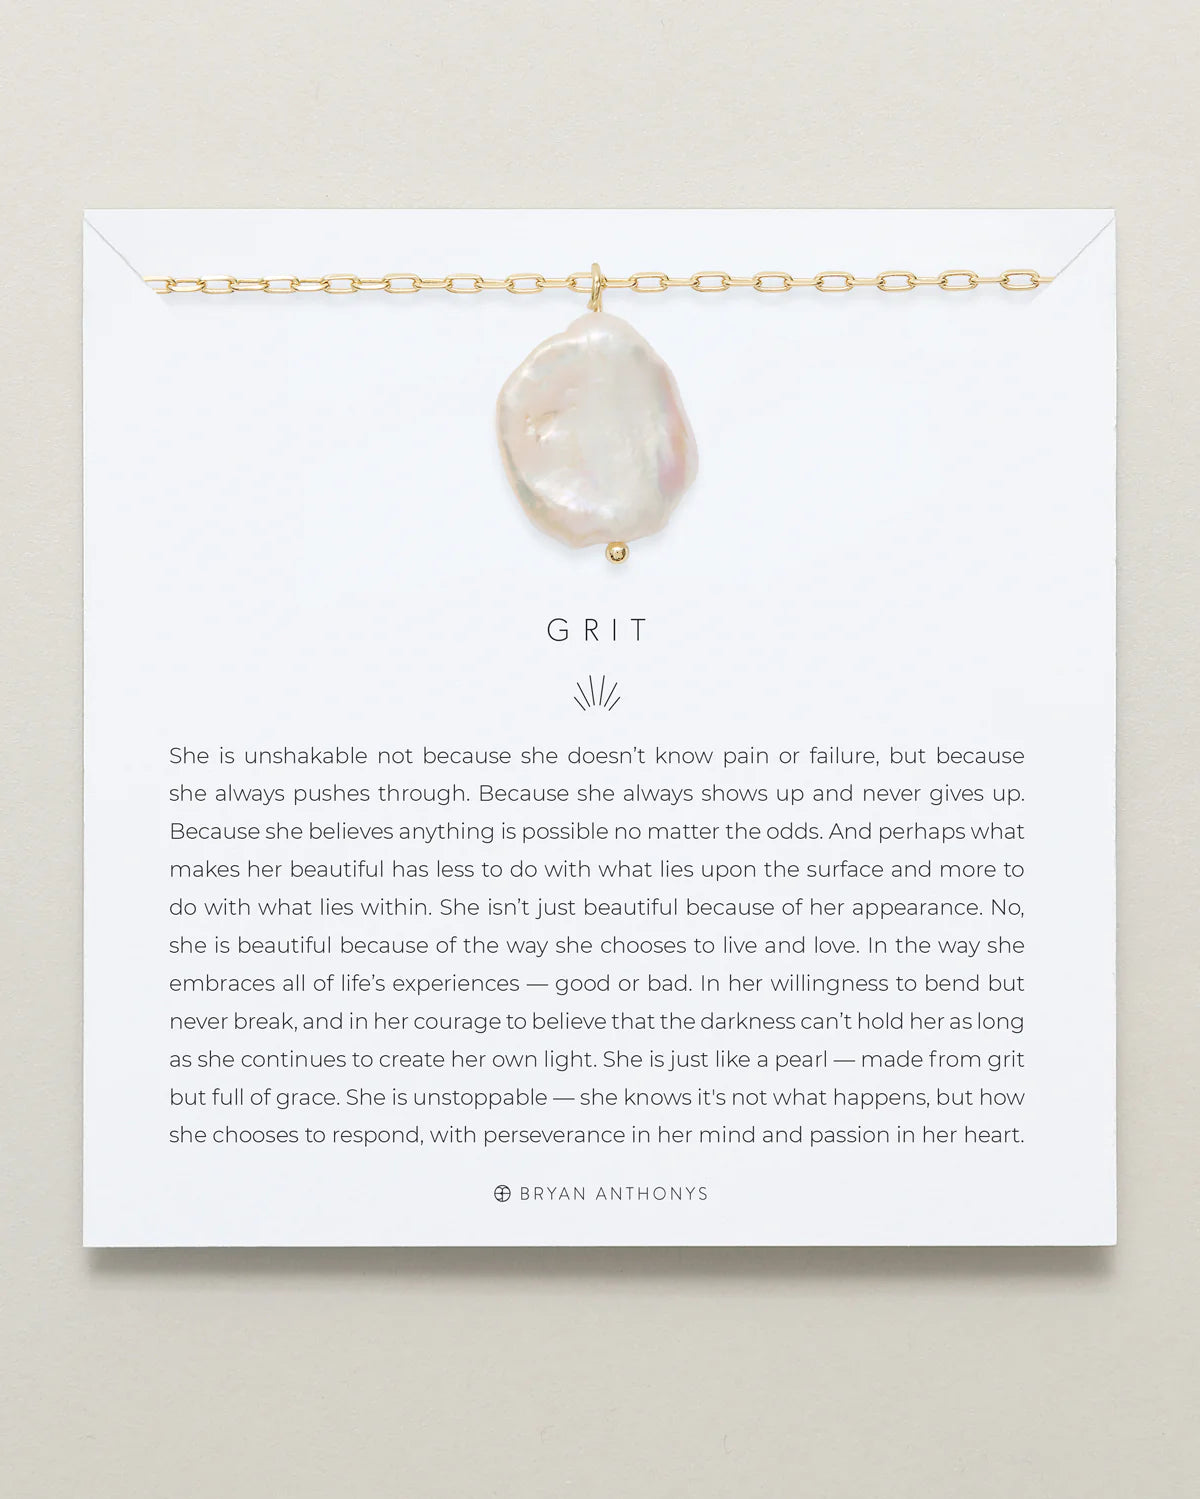 Grit collection by Bryan Anthonys